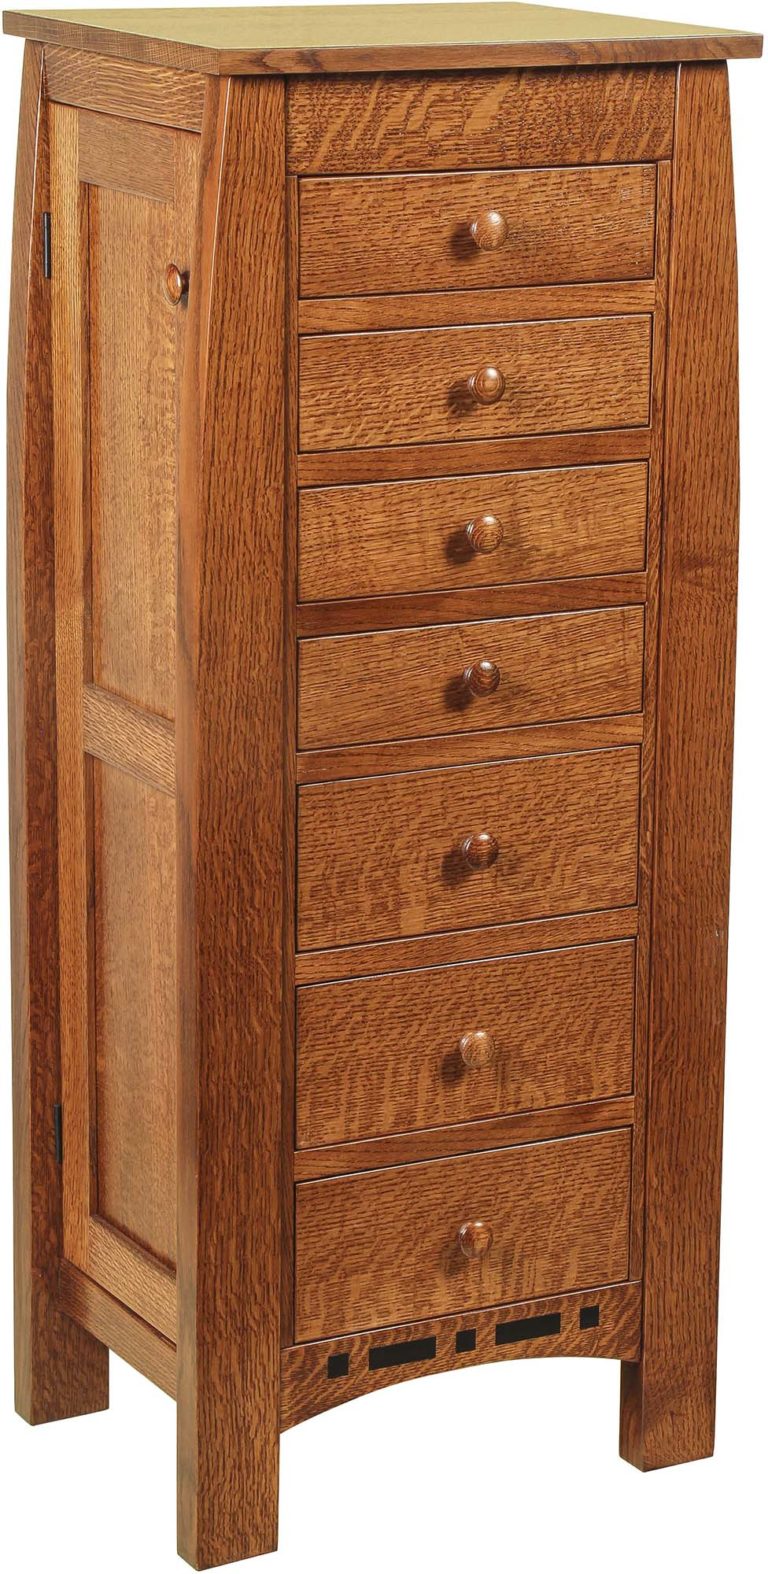 Amish Boulder Creek Jewelry Armoire